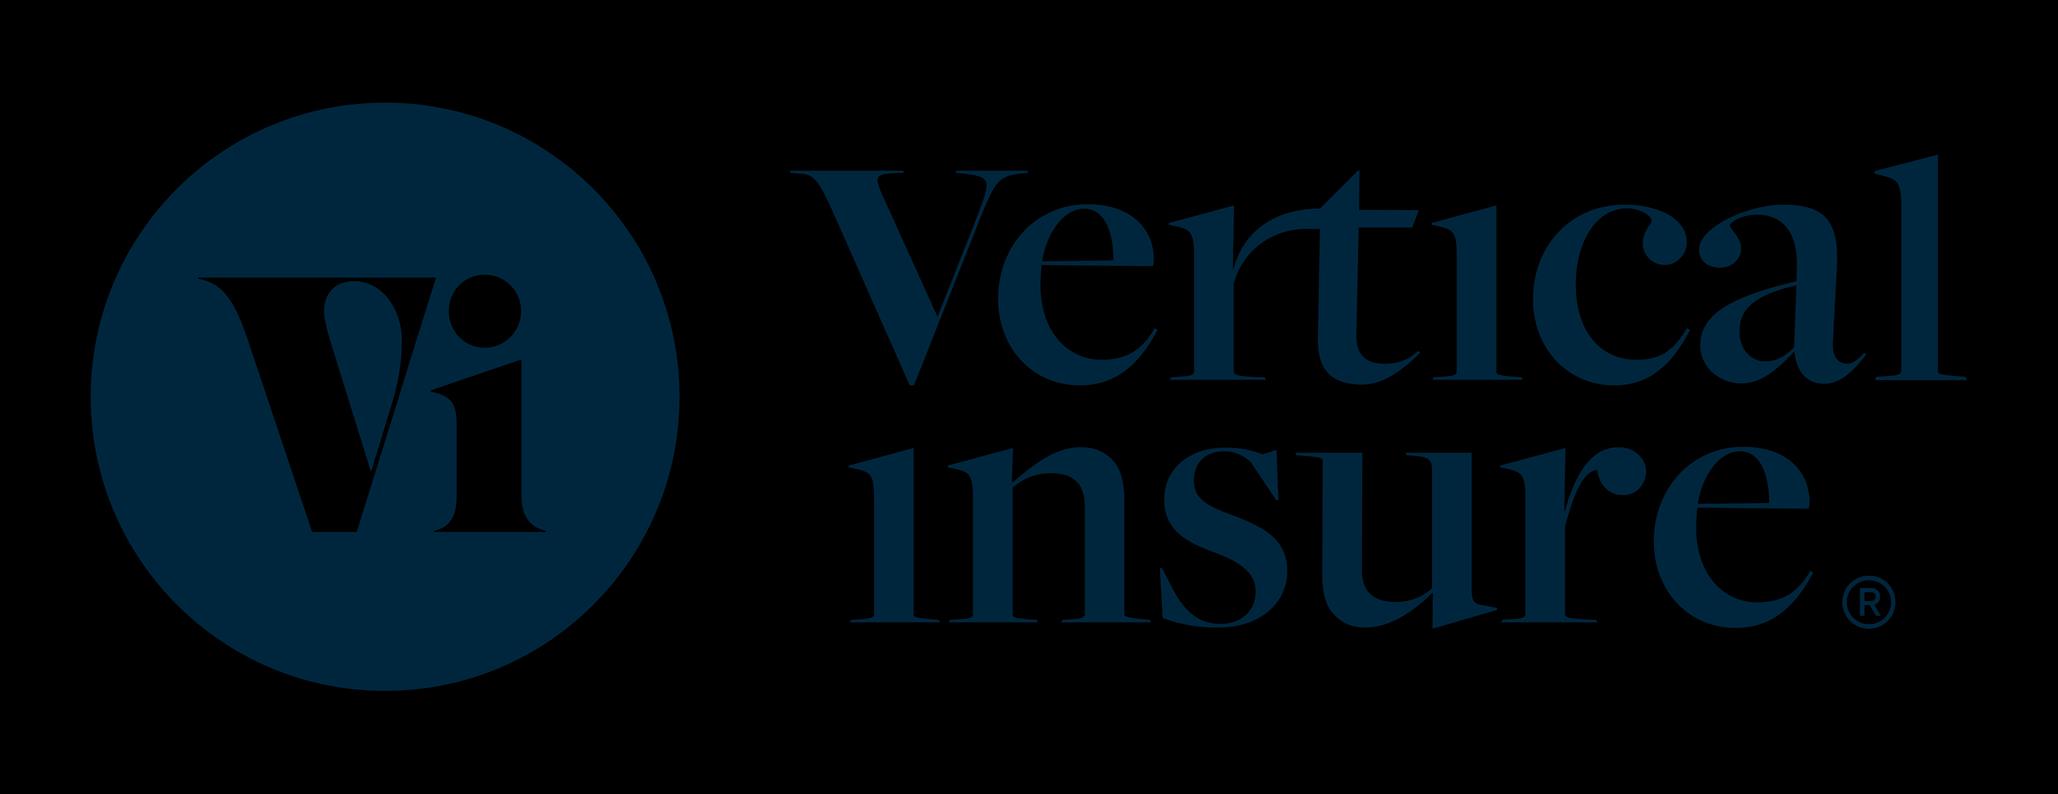 Vertical Insure, The Embedded Insurance Platform For Platforms, Secures $4M In Seed Funding To Simplify Insurance